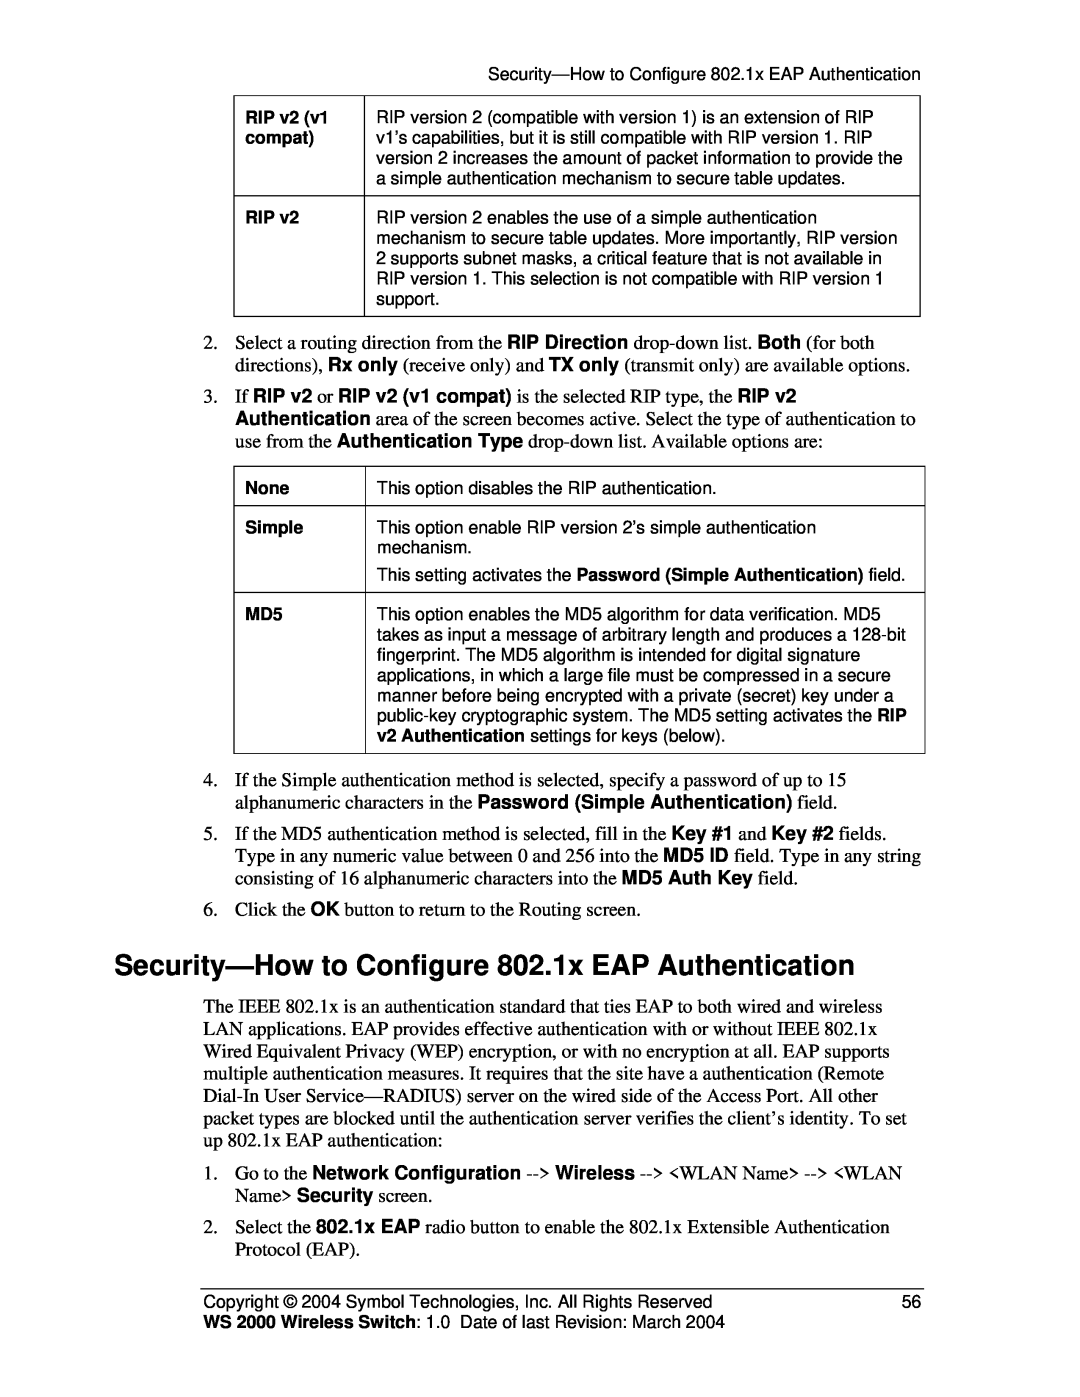 Symbol Technologies WS 2000 manual Security-How to Configure 802.1x EAP Authentication 